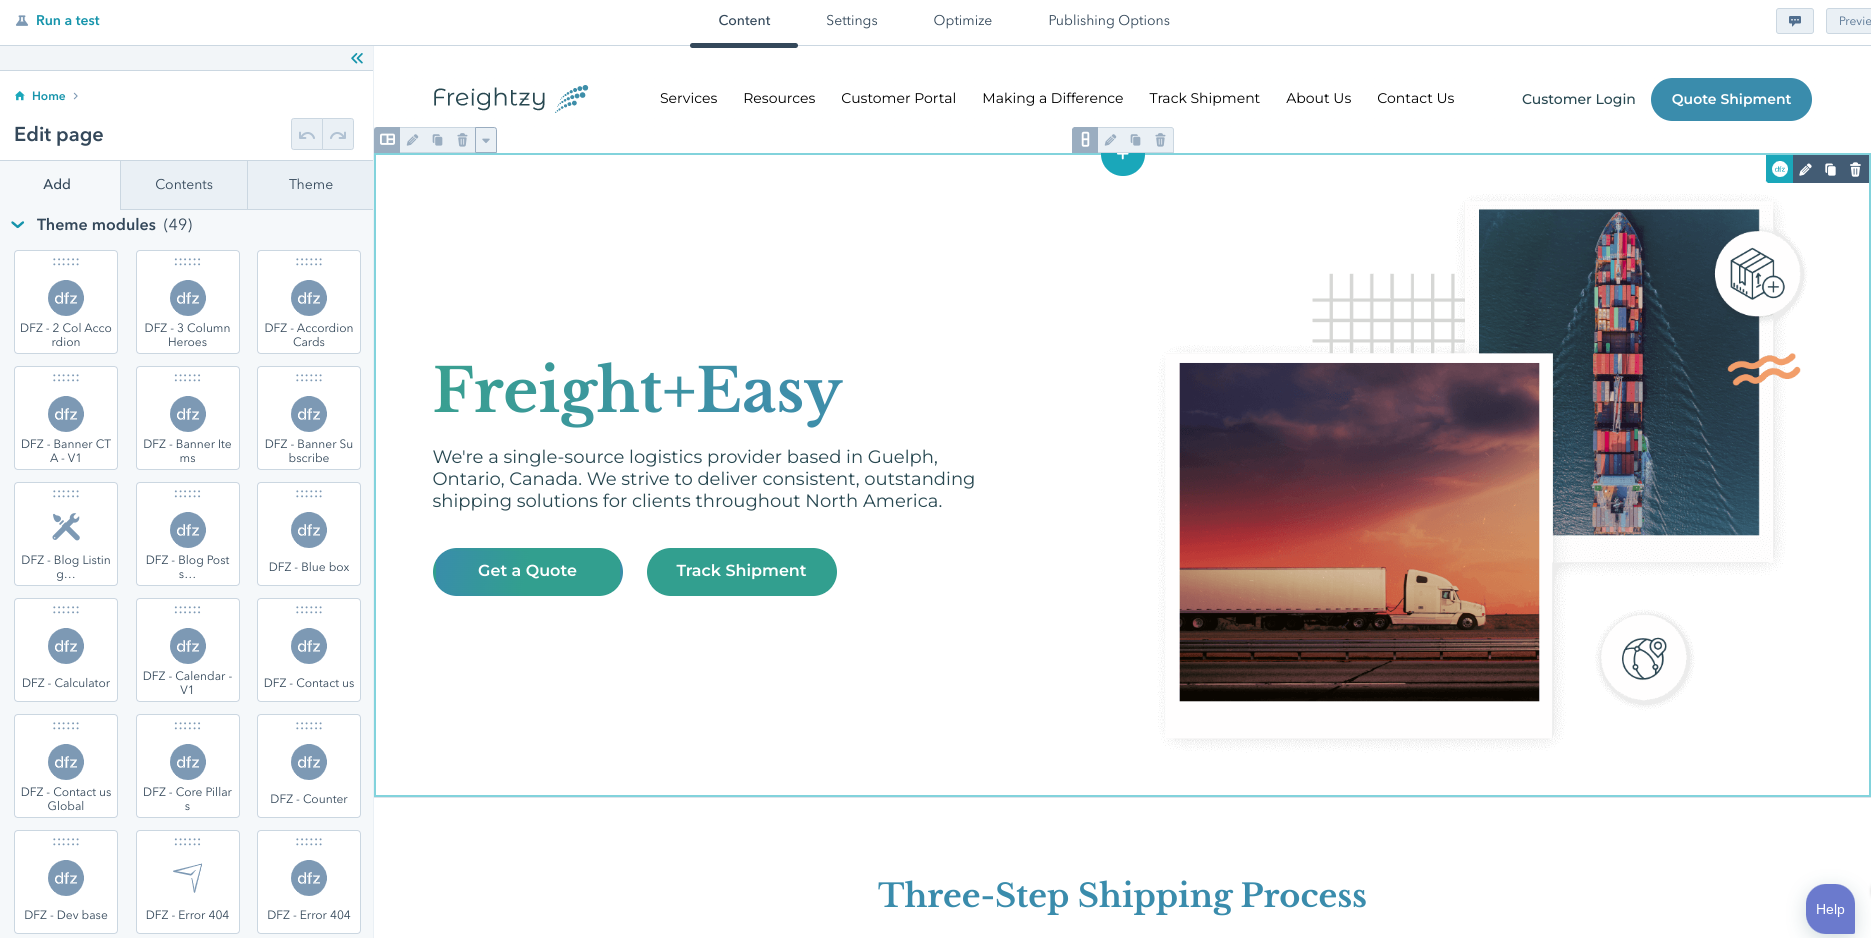 Brand Manual and Web Development in HubSpot for Freightzy Case Study